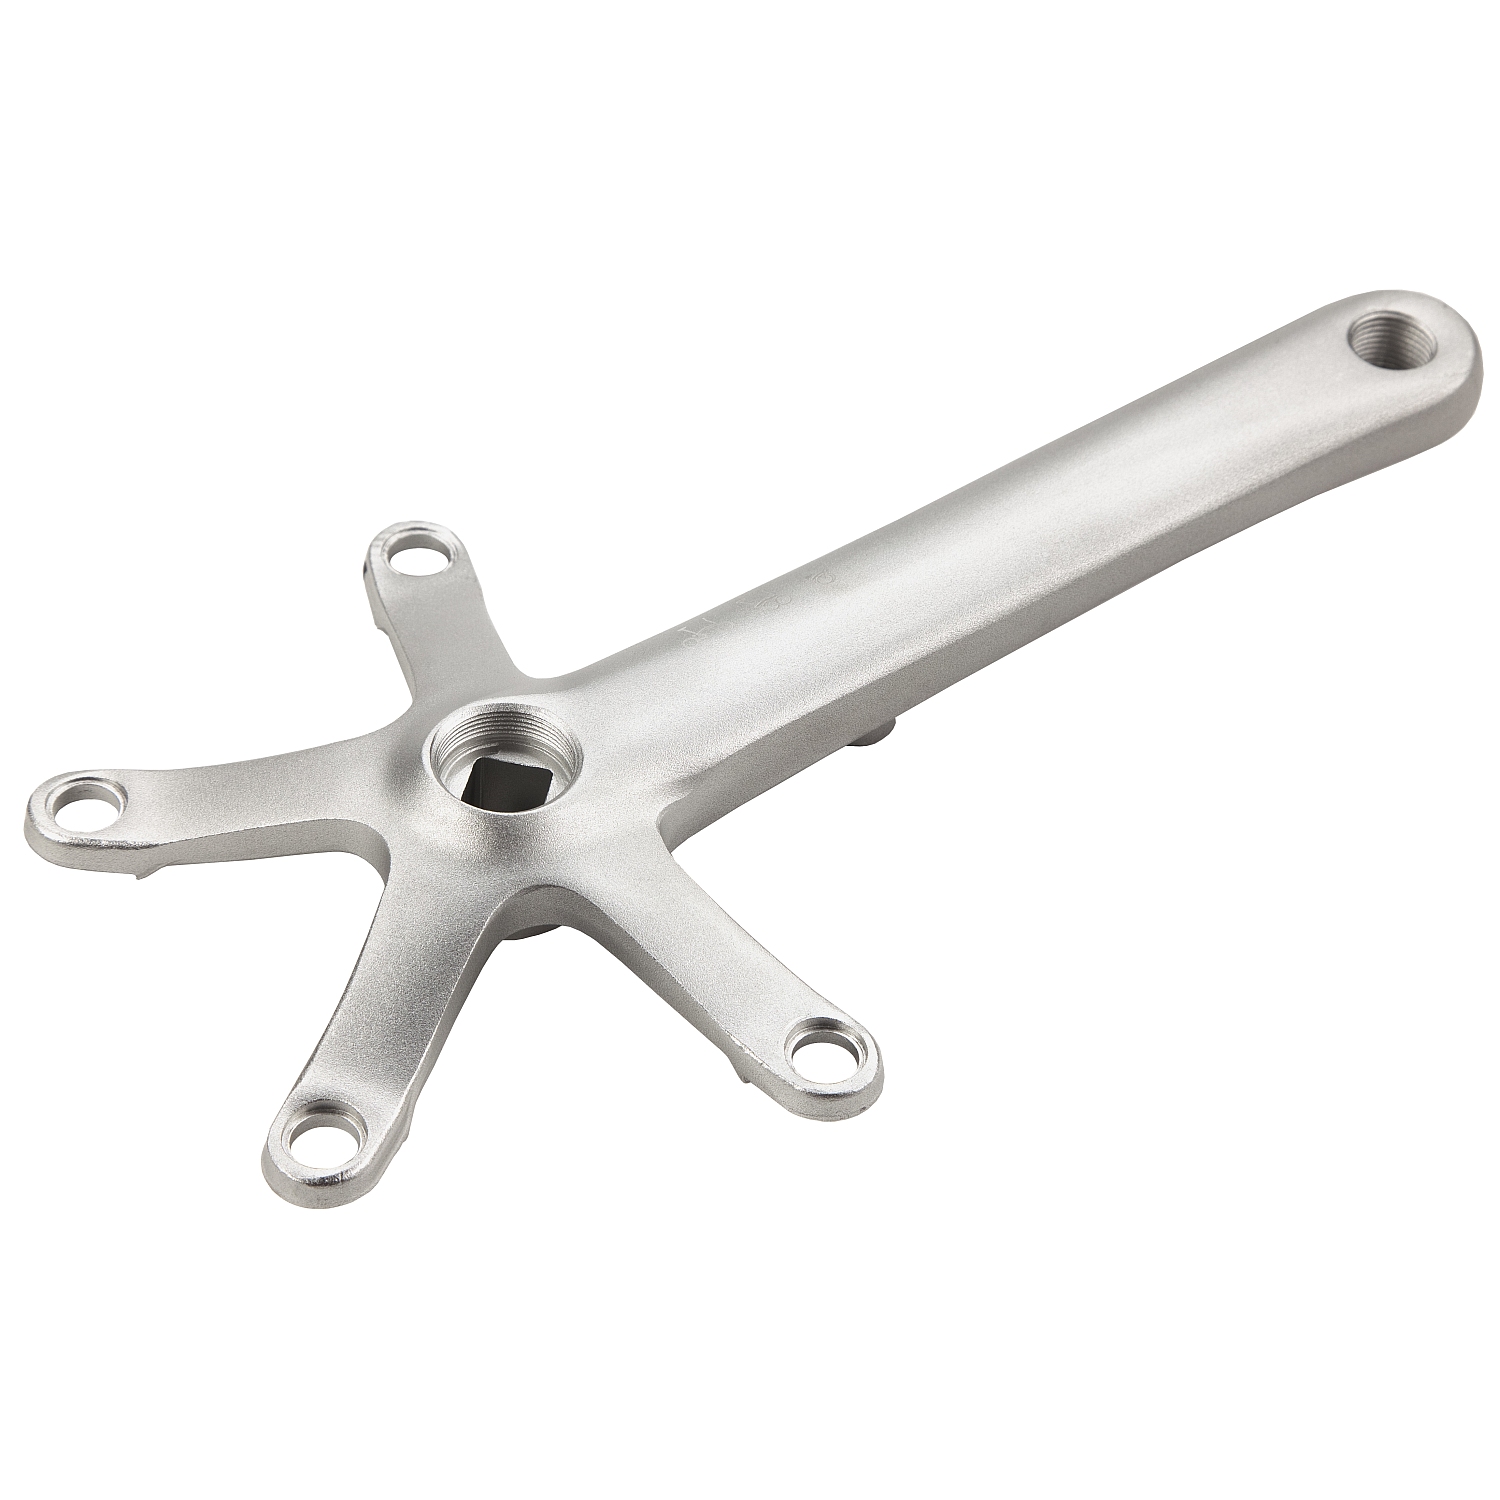 Productfoto van Brompton Crank Arm Right with Spider - silver